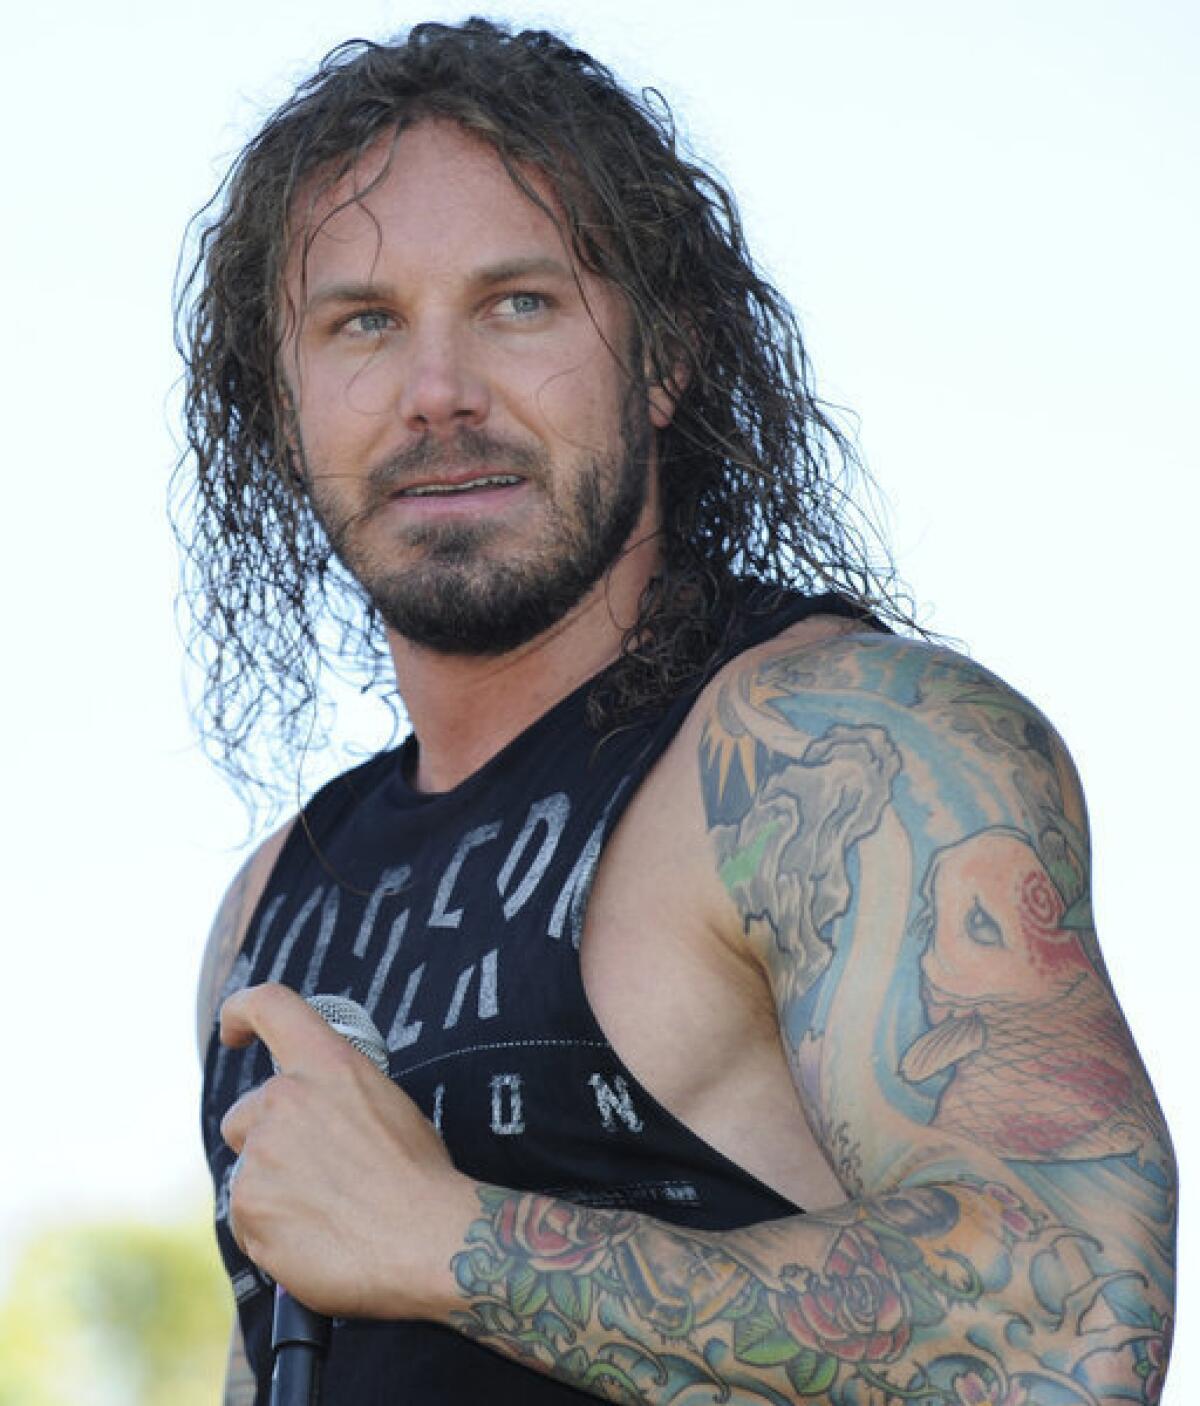 Tim Lambesis of the music group As I Lay Dying has been released on bail.